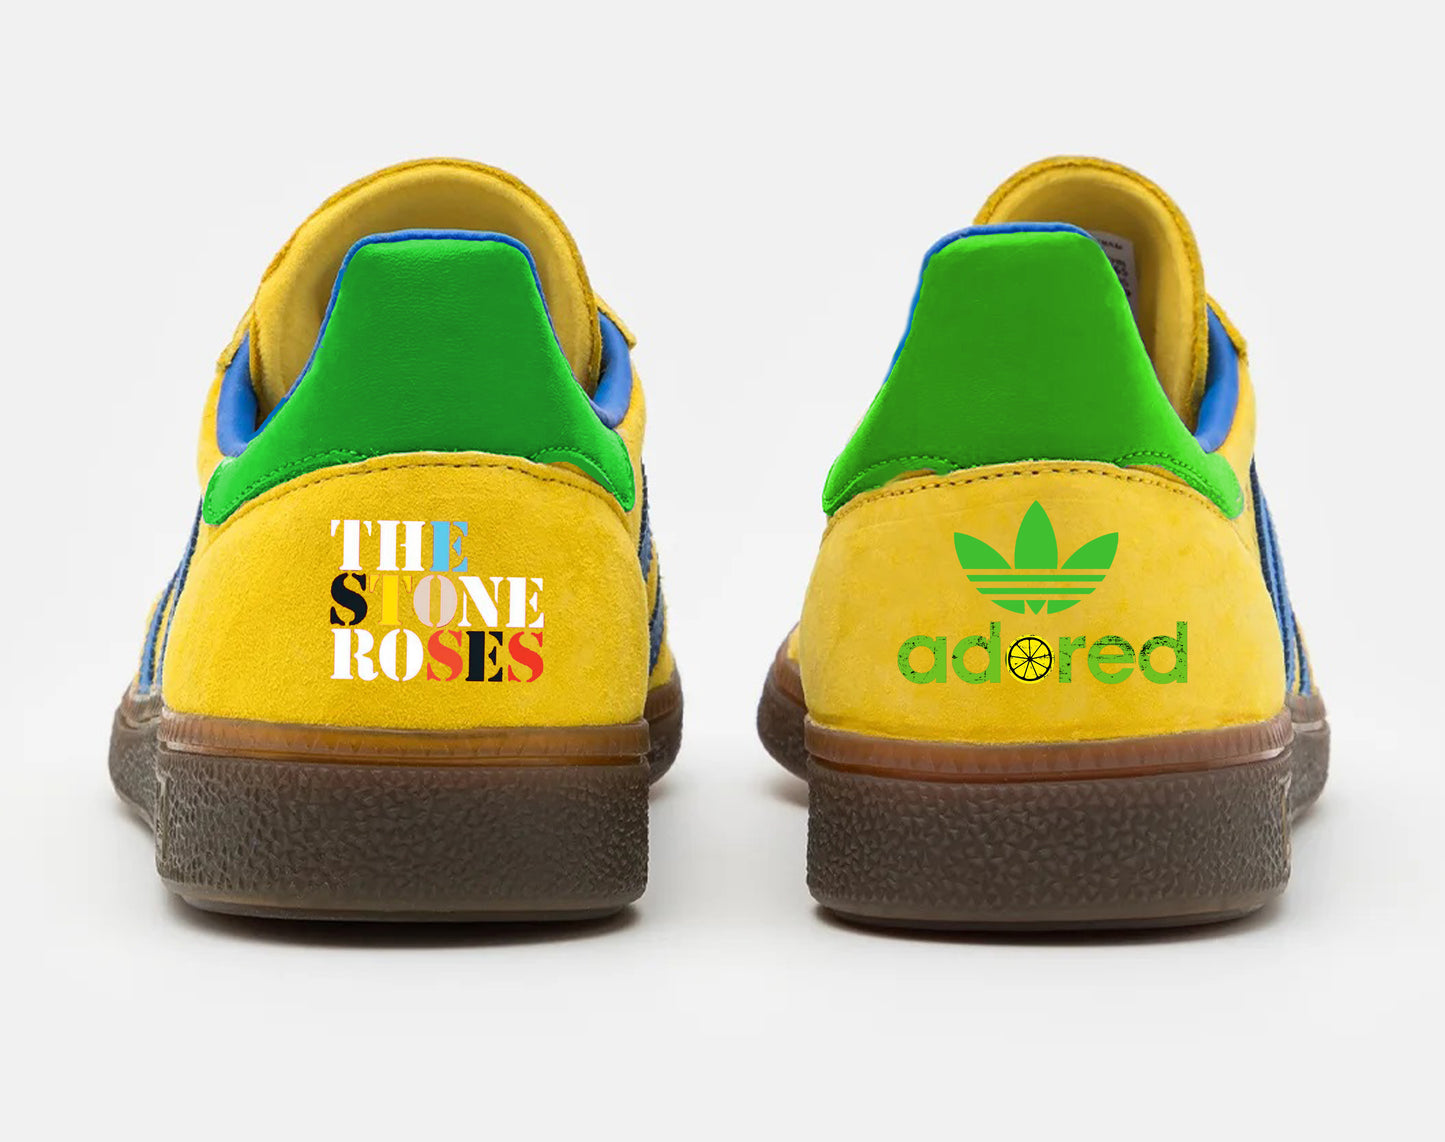 Limited edition The Stone Roses Heaton Park 2012 Yellow / Green / blue  trainers / sneakers